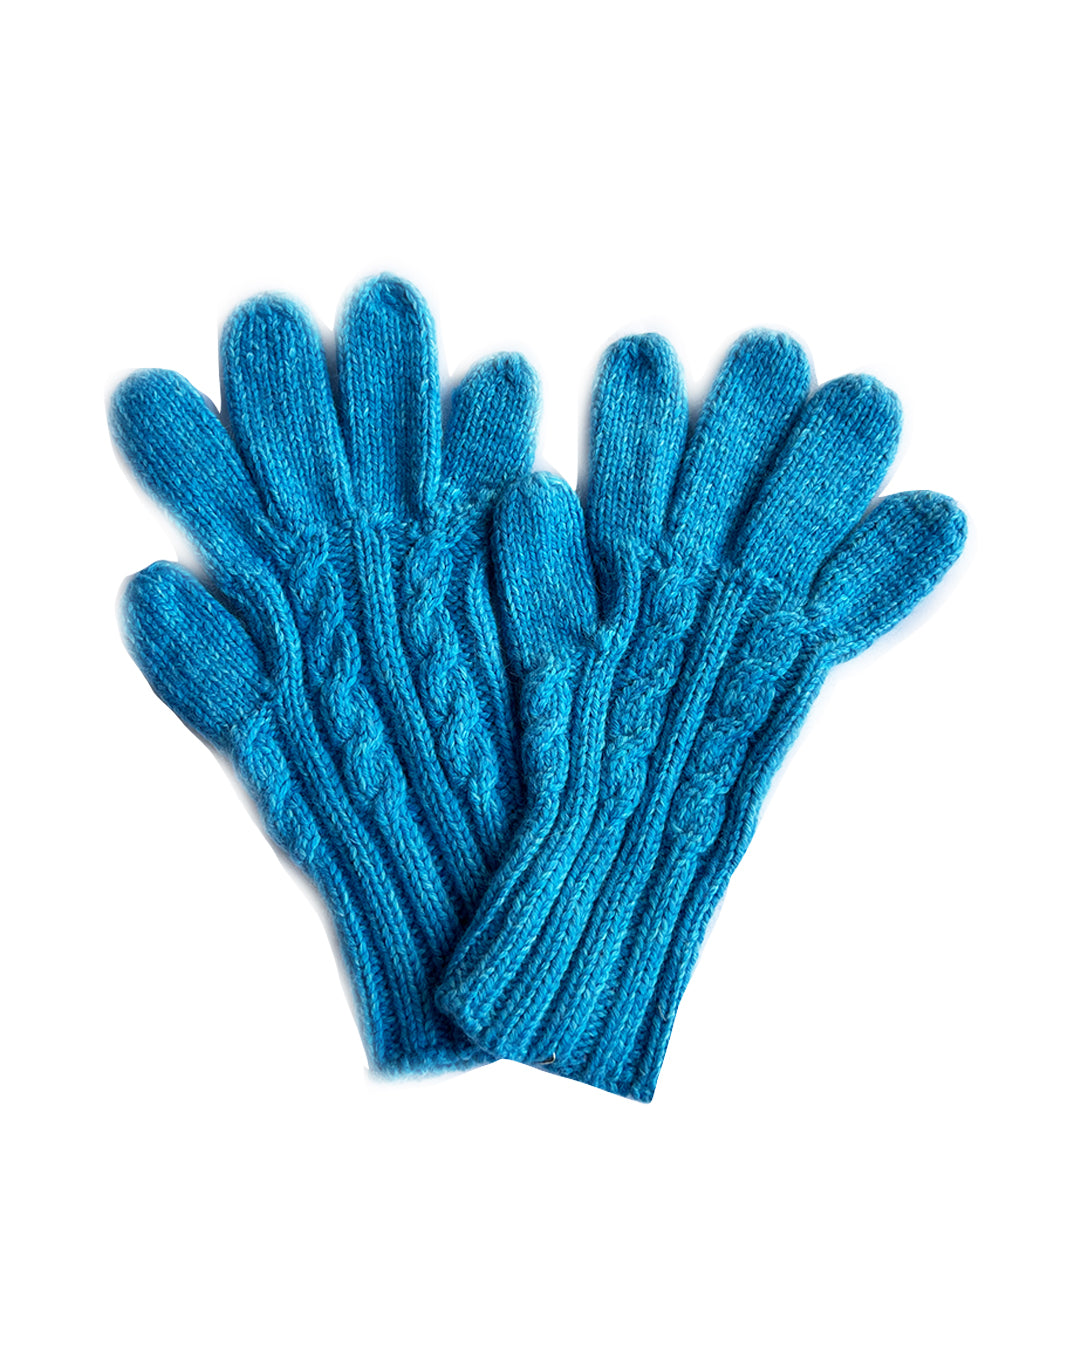 Sky Blue Cable Knit Cashmere Gloves | cukimber designs